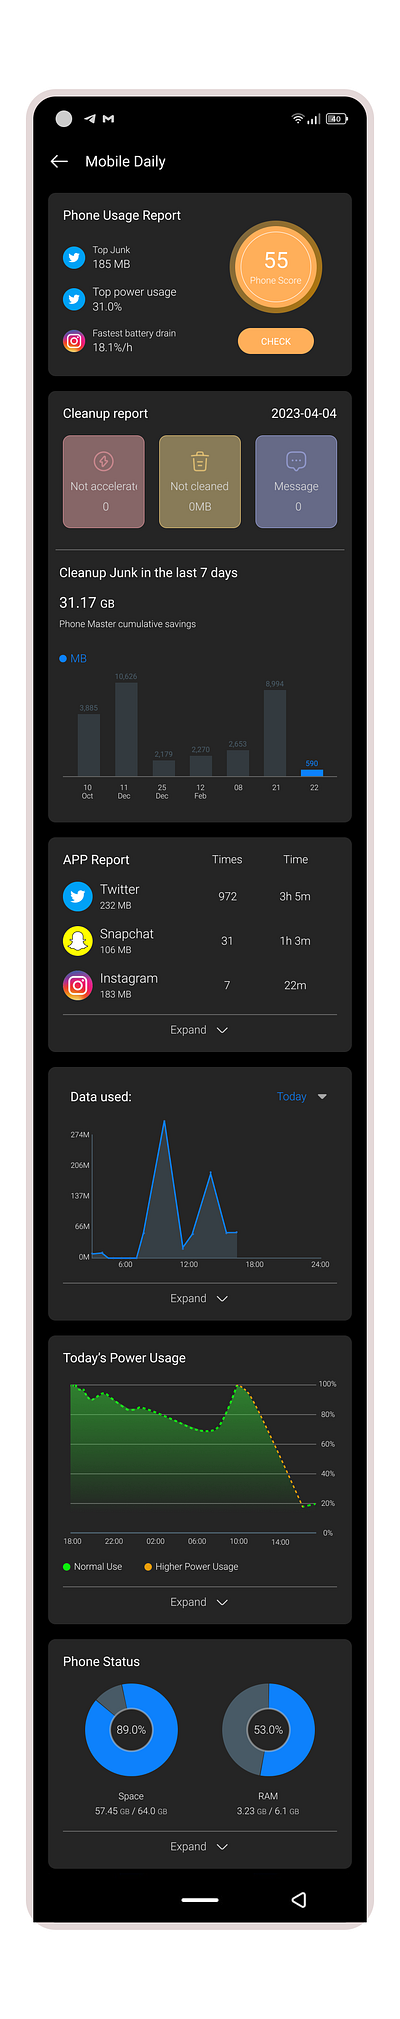 Android Phone Performance & Management Report Cards android design ui